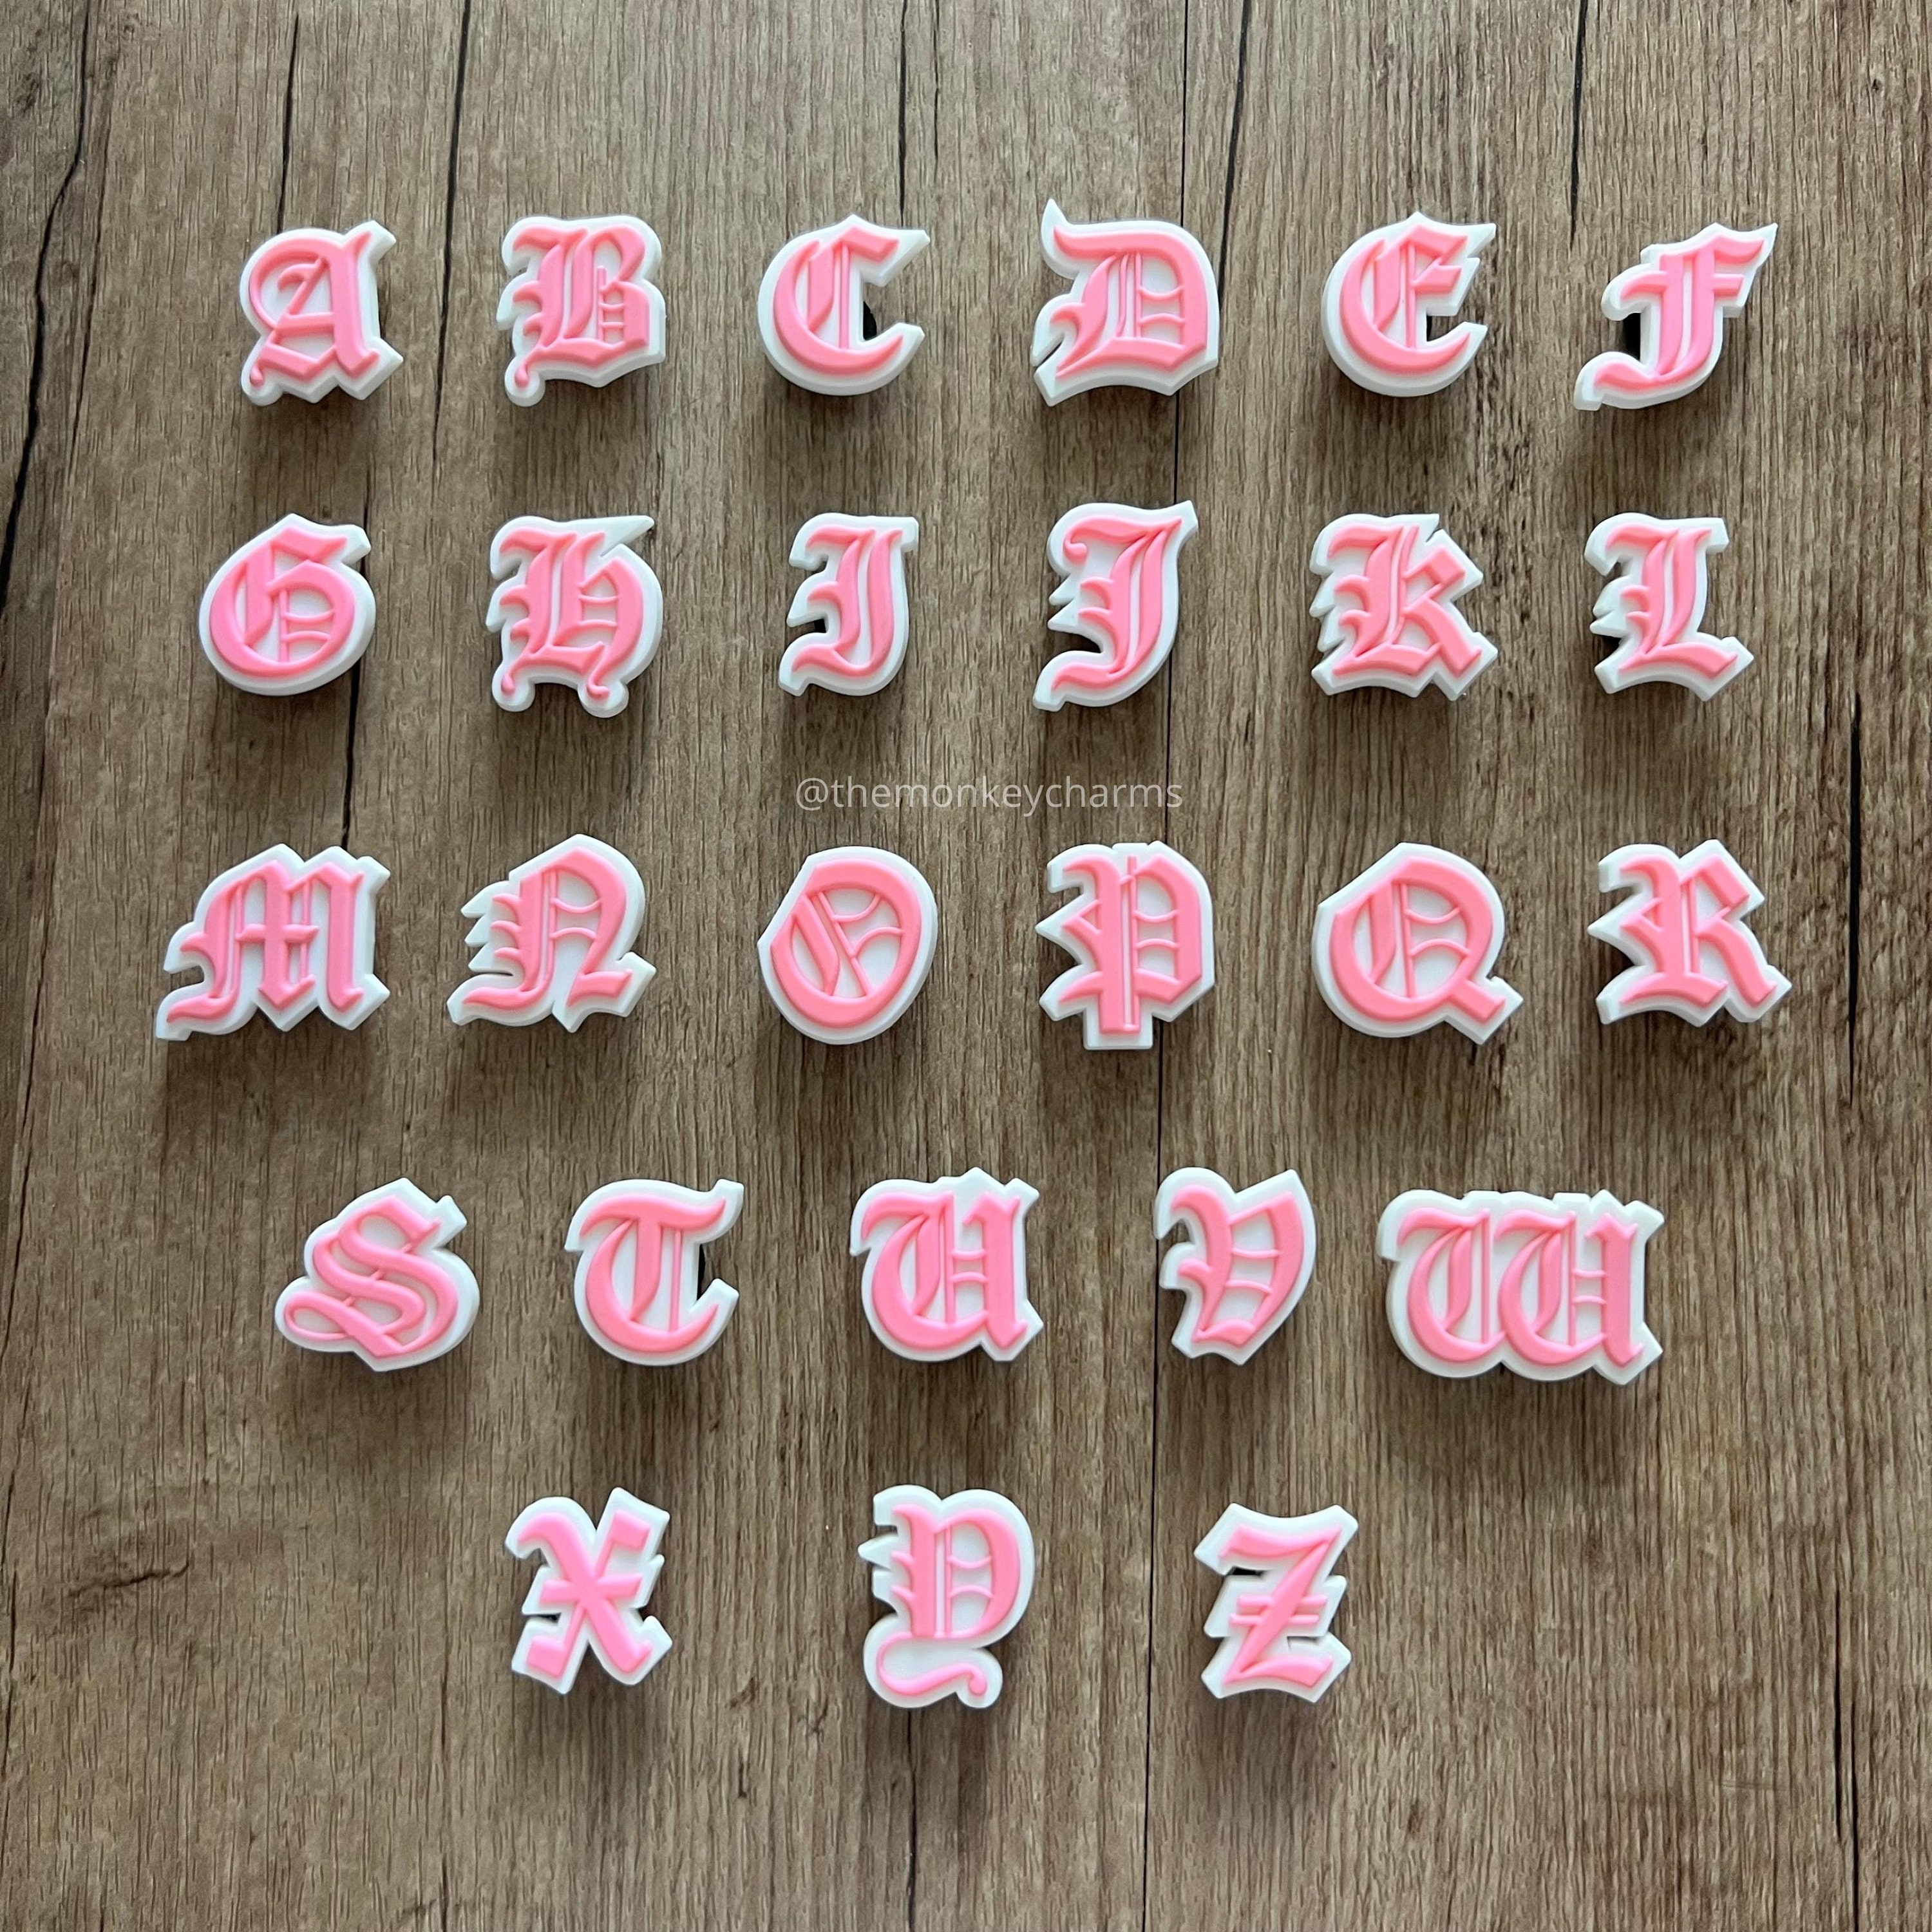 37 Sets of Pink letter Shoes Croc charms Accessories PVC jibz Shoes  Decoration Girls Children's Party Christmas Gifts